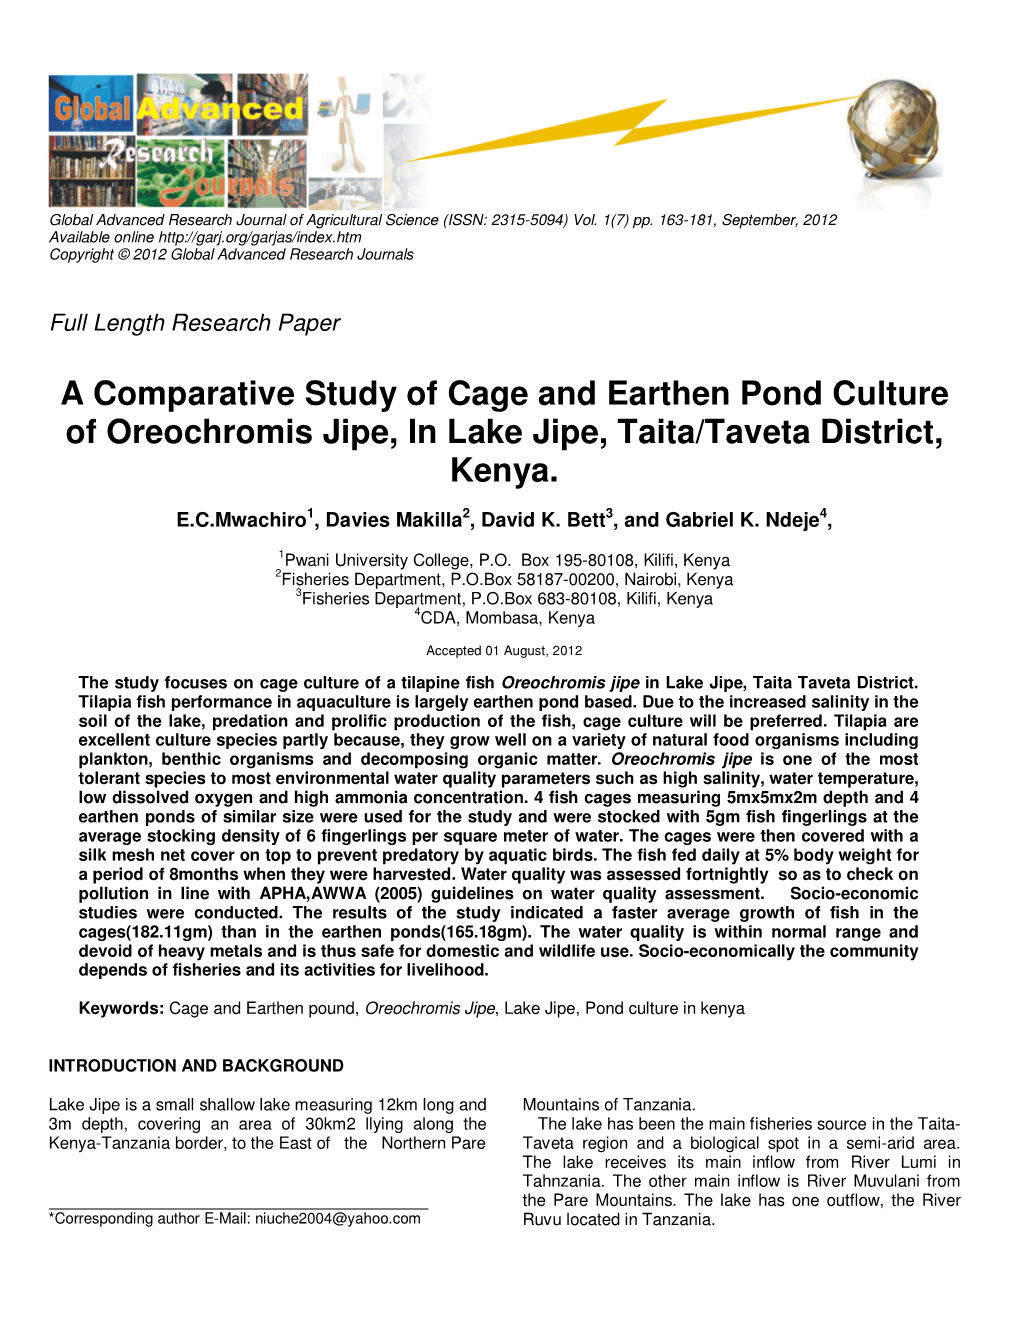 A Comparative Study of Cage and Earthen Pond Culture of Oreochromis Jipe, in Lake Jipe, Taita/Taveta District, Kenya